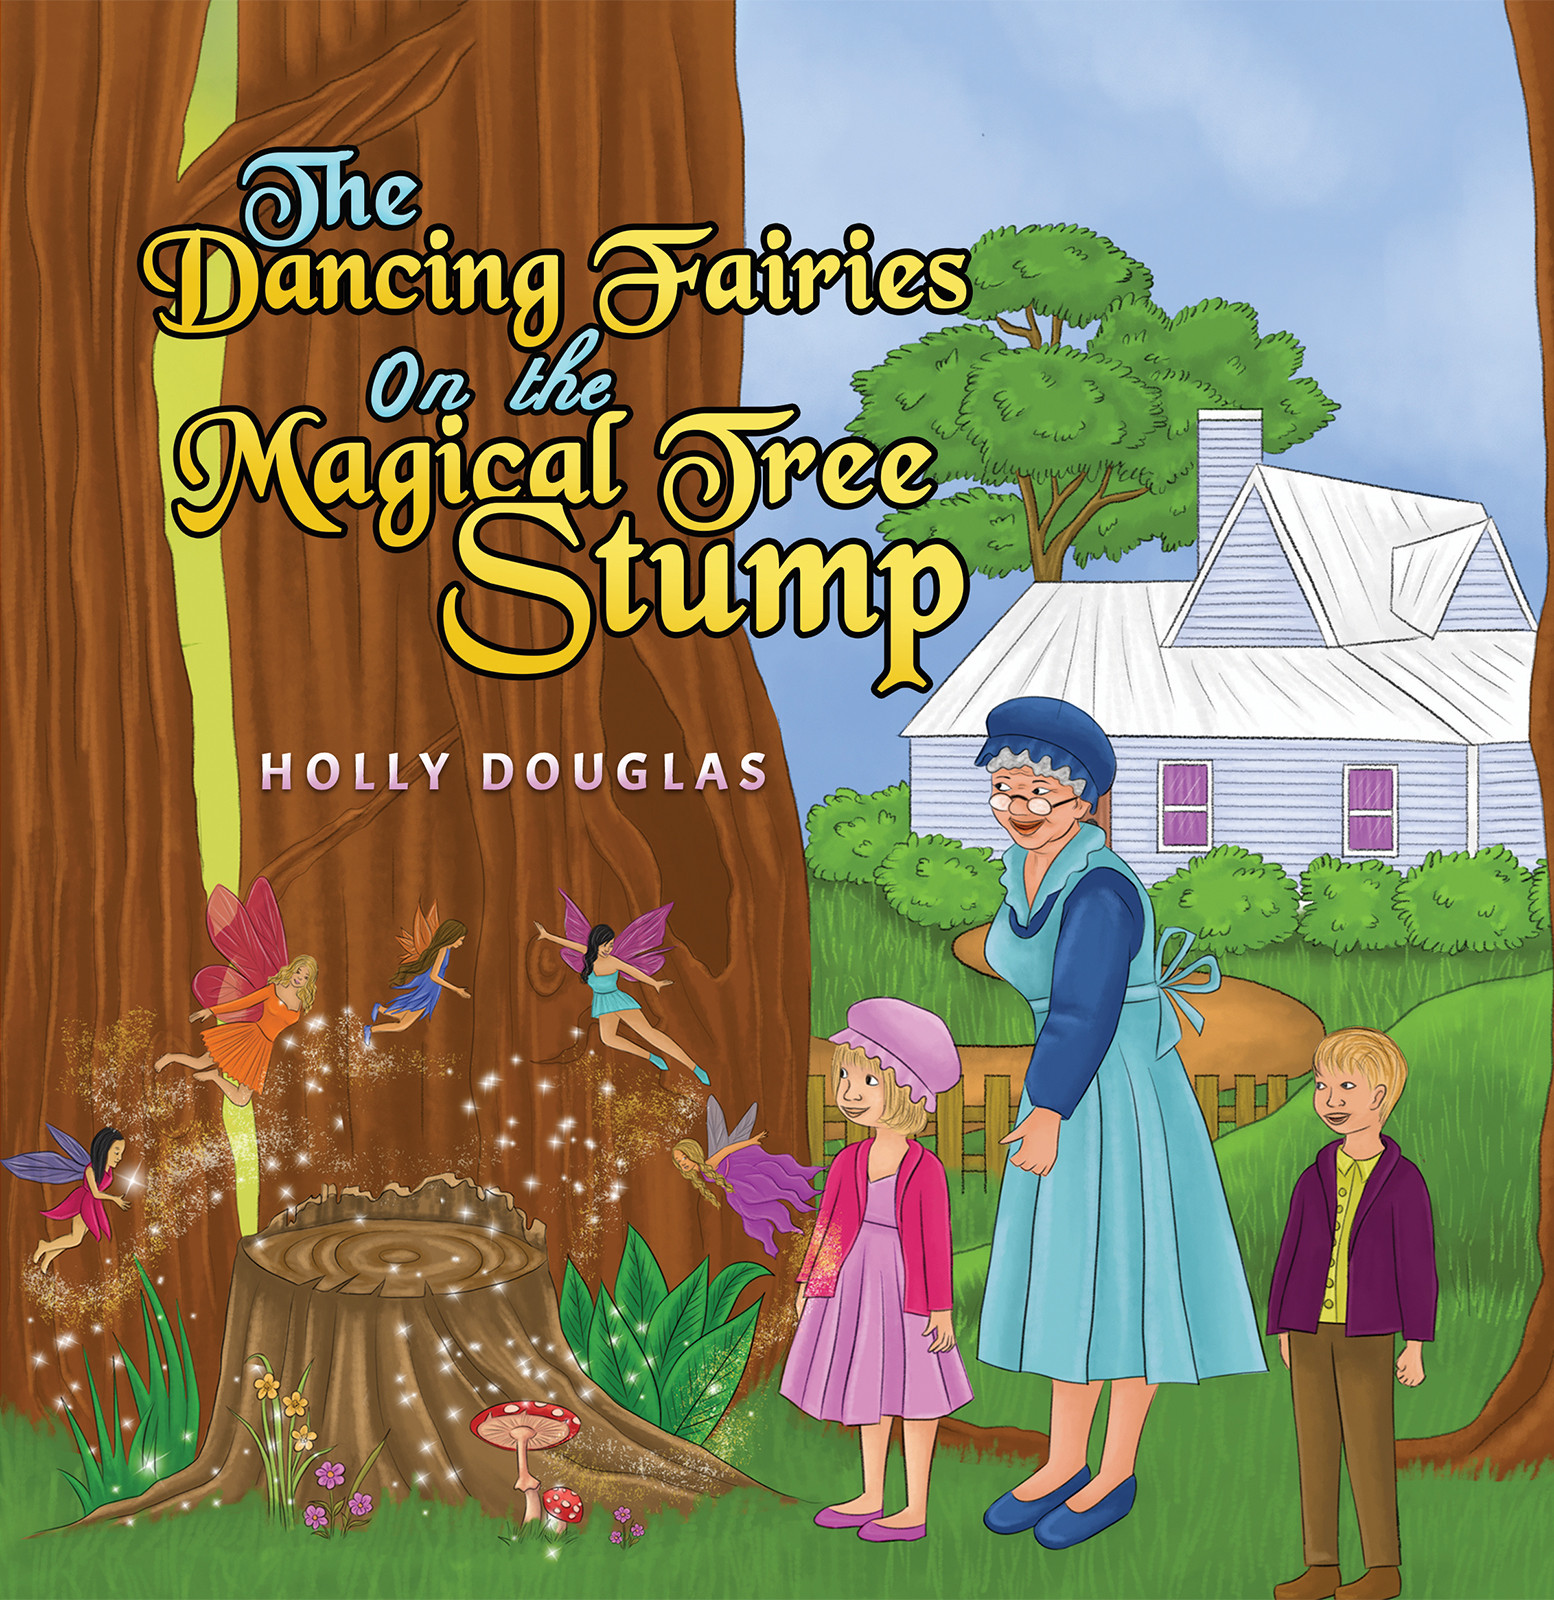 The Dancing Fairies on the Magical Tree Stump-bookcover